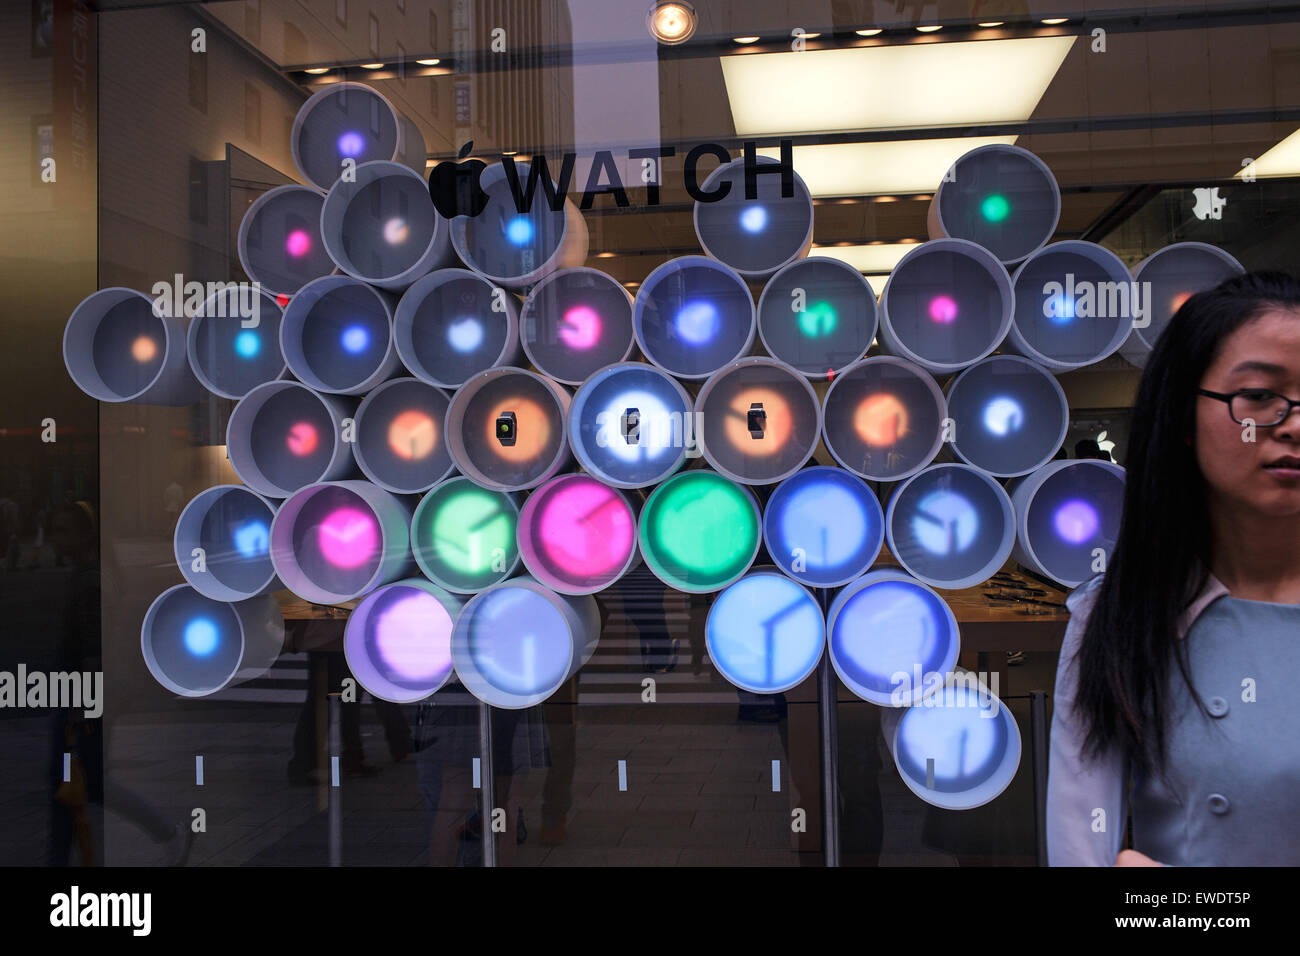 Apple Store with Apple Watch display in Ginza, Tokyo, Japan Stock Photo